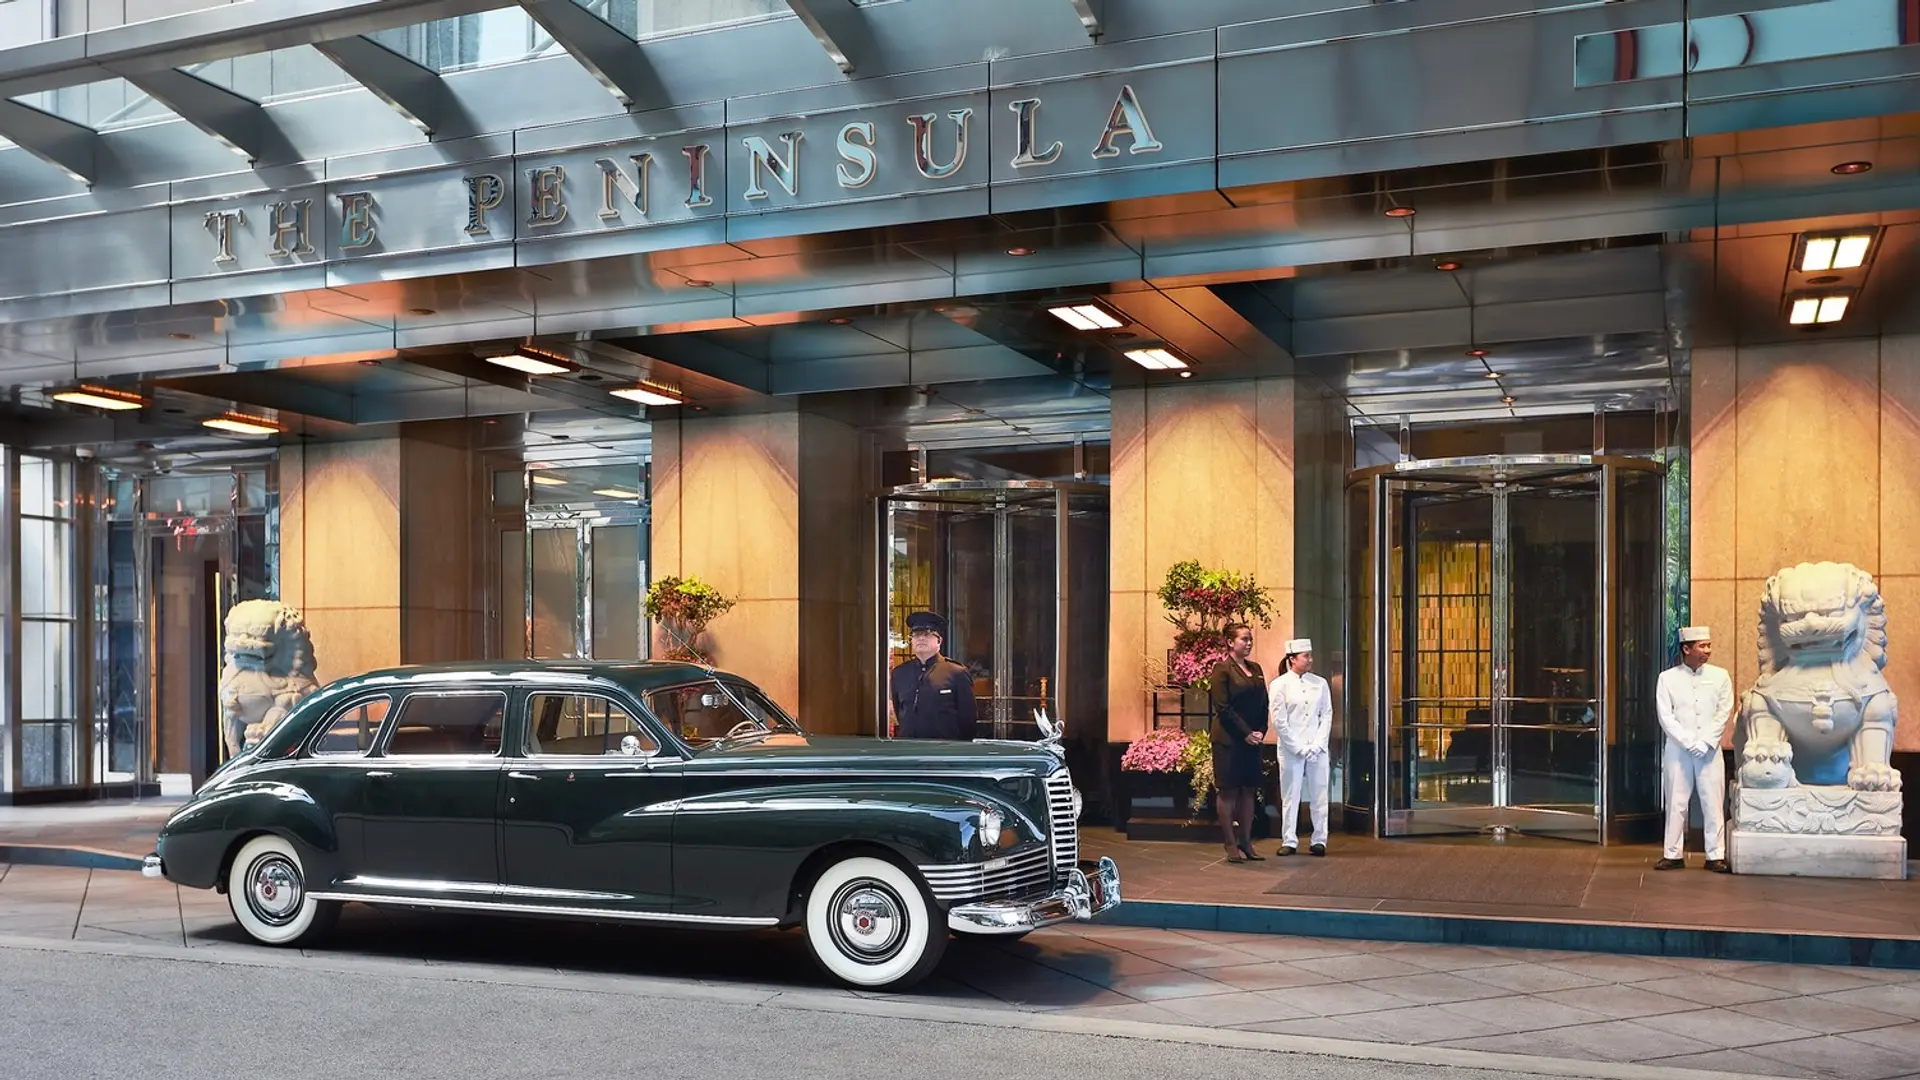 Hotel review Location' - The Peninsula Chicago - 2